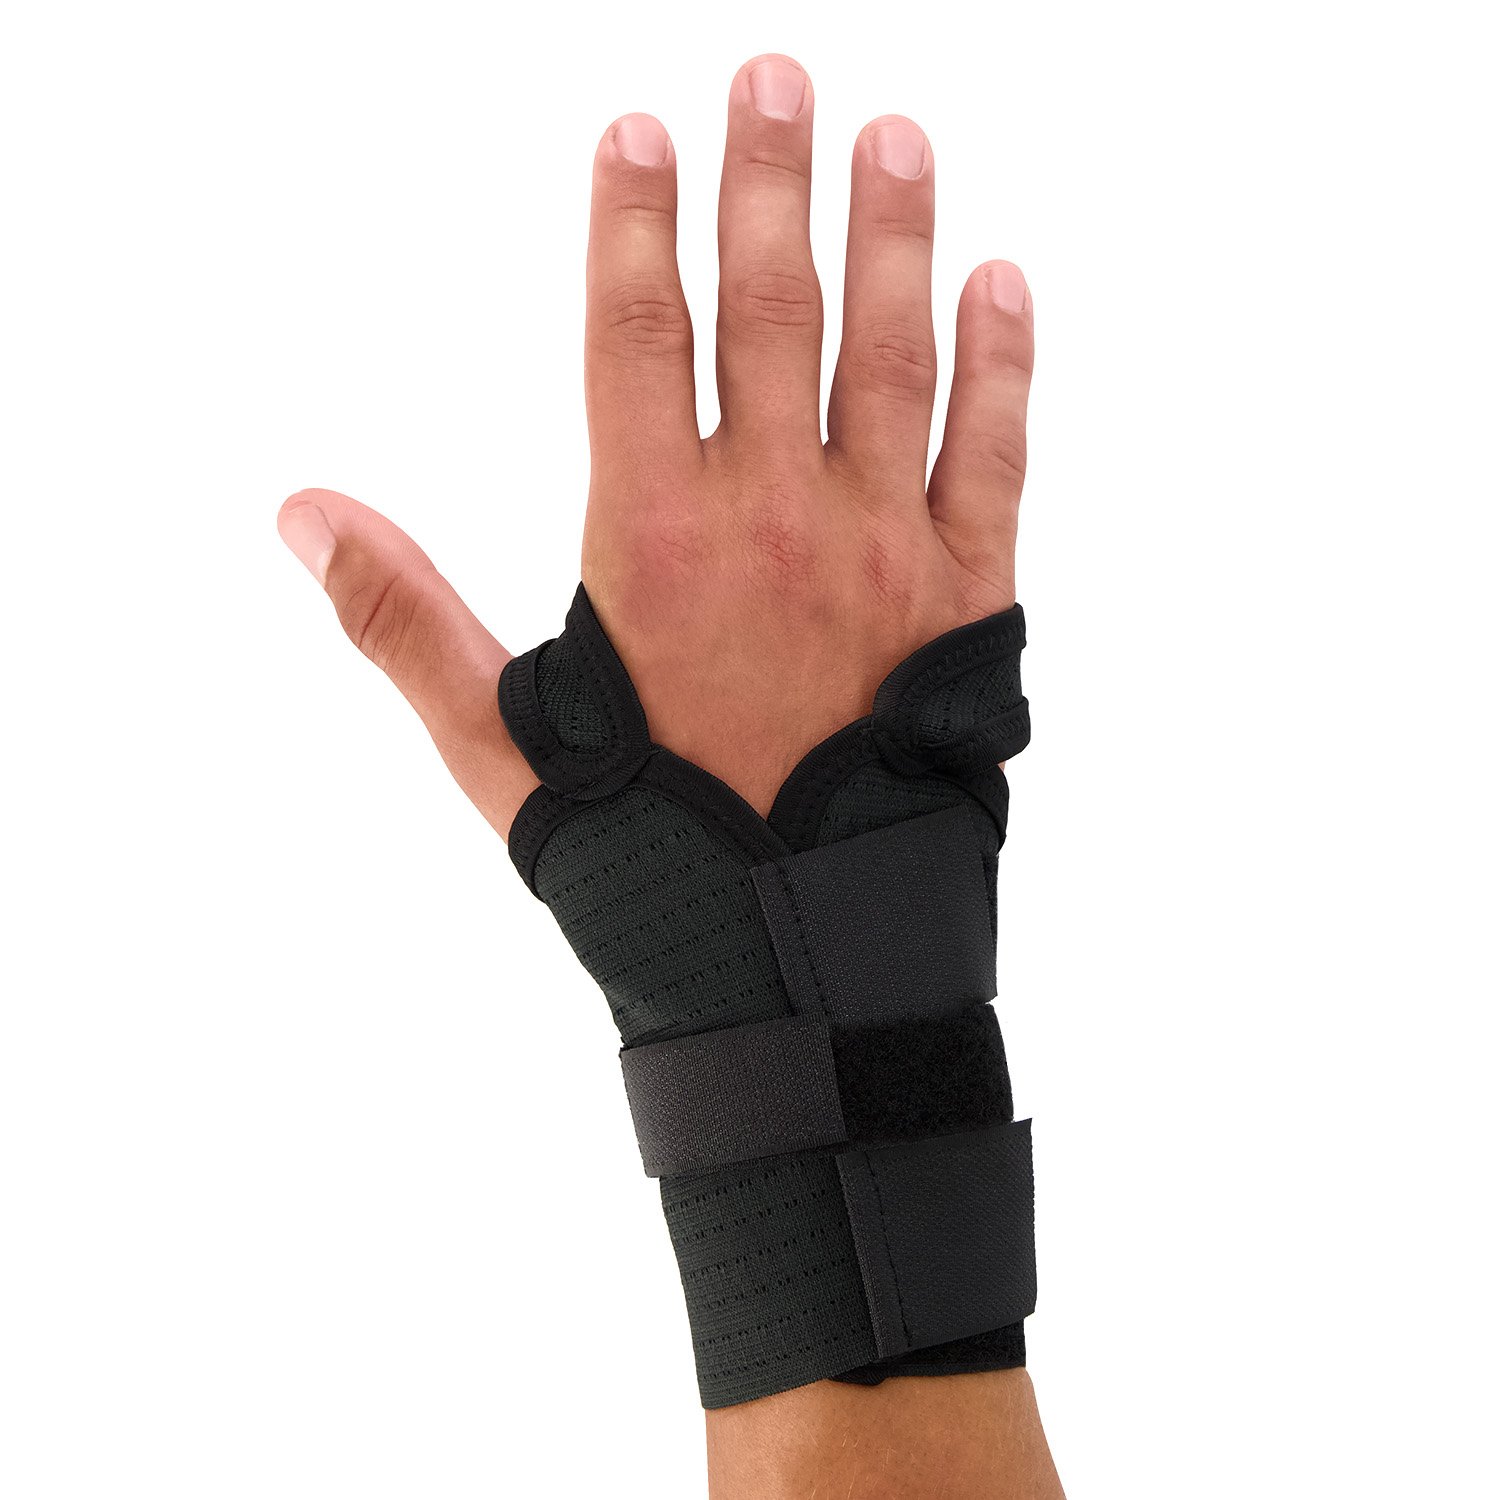 super ortho - carpal tunnel syndrome wrist support hand closed